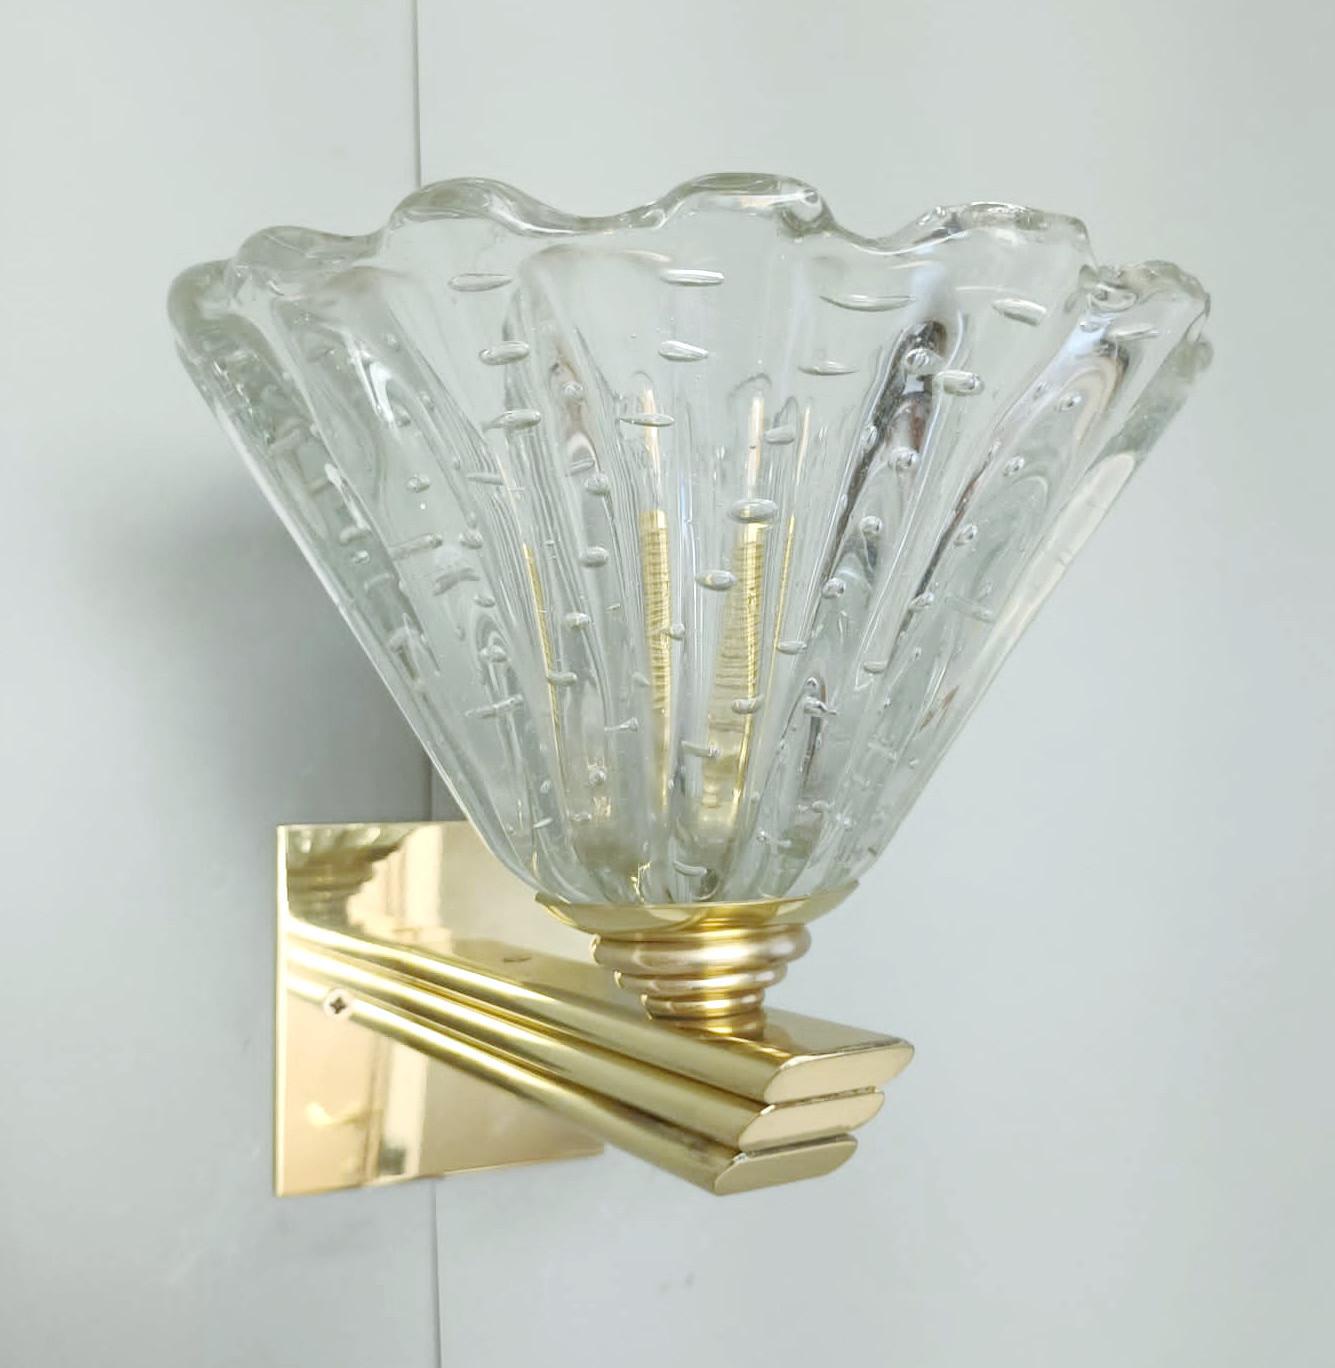 Vintage Italian wall lights with hand blown Murano glass cups hand blown with bubbles inside the glass using Bollicine technique, mounted on brass frames / Made in Italy by Barovier e Toso, circa 1950s
Original mark on the backplate
Measures: